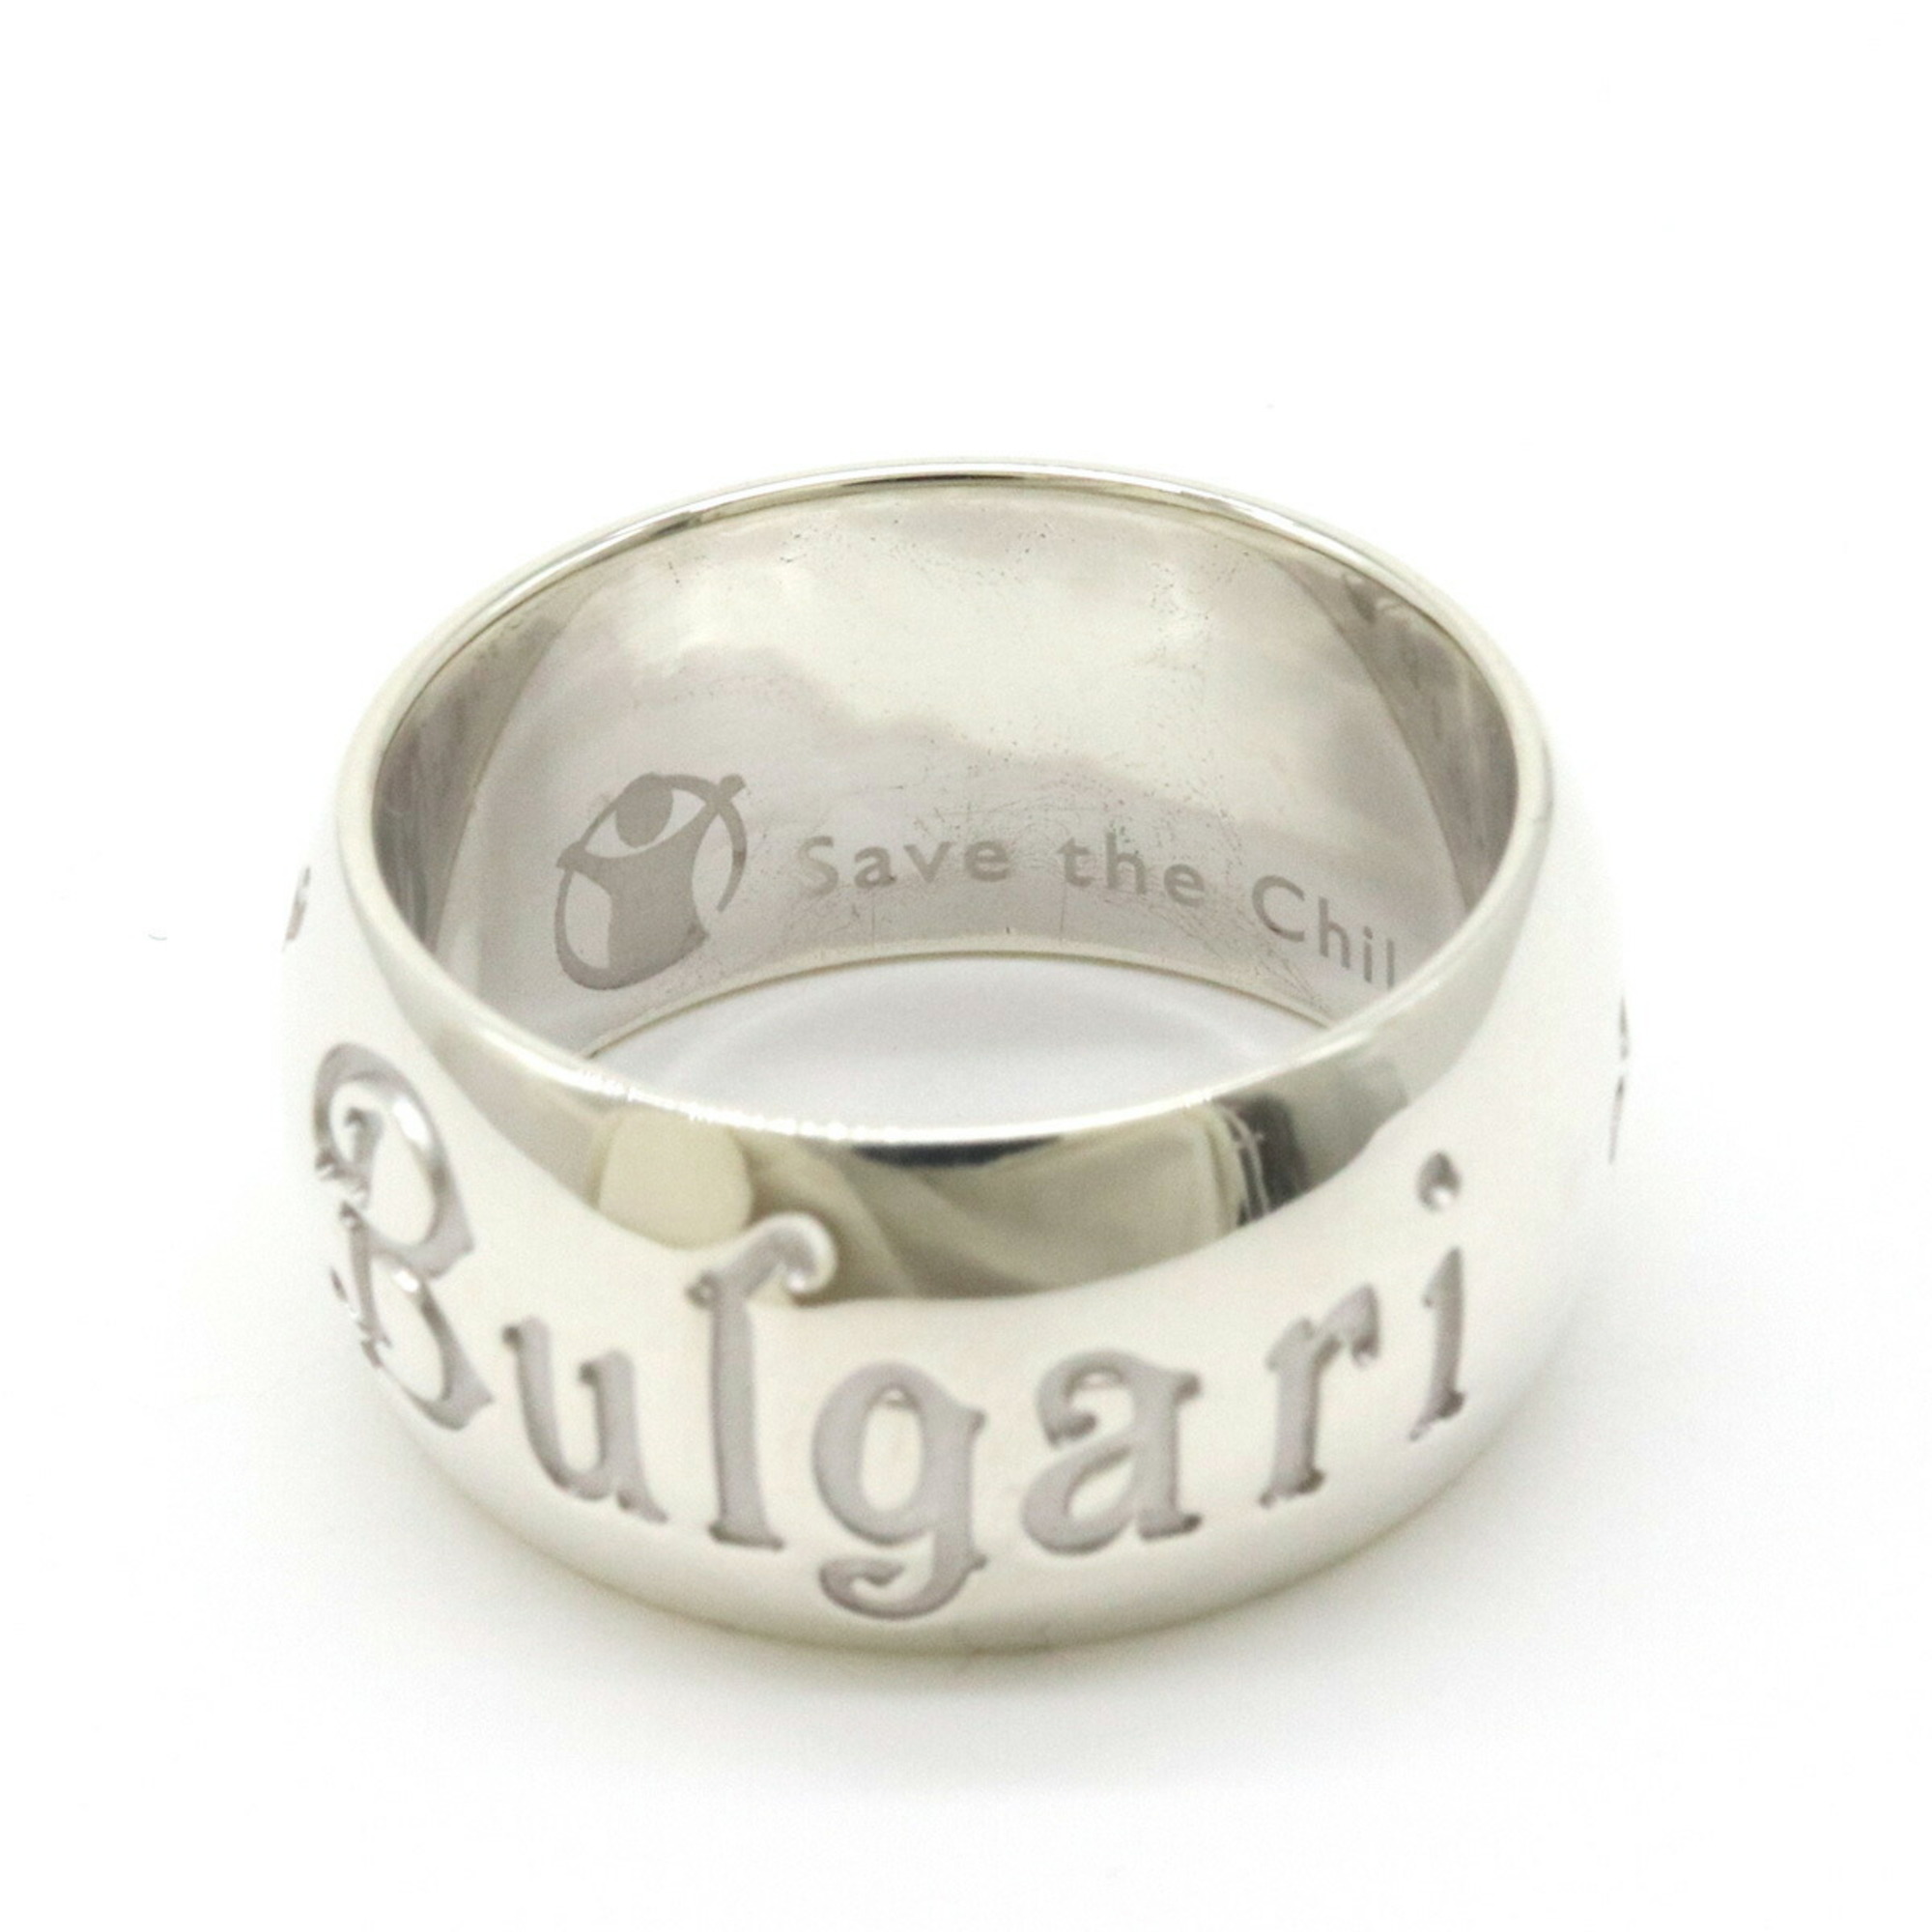 BVLGARI Save the Children Sotirio Ring Charity SV925 Silver #53 Japanese Size Approx. 14